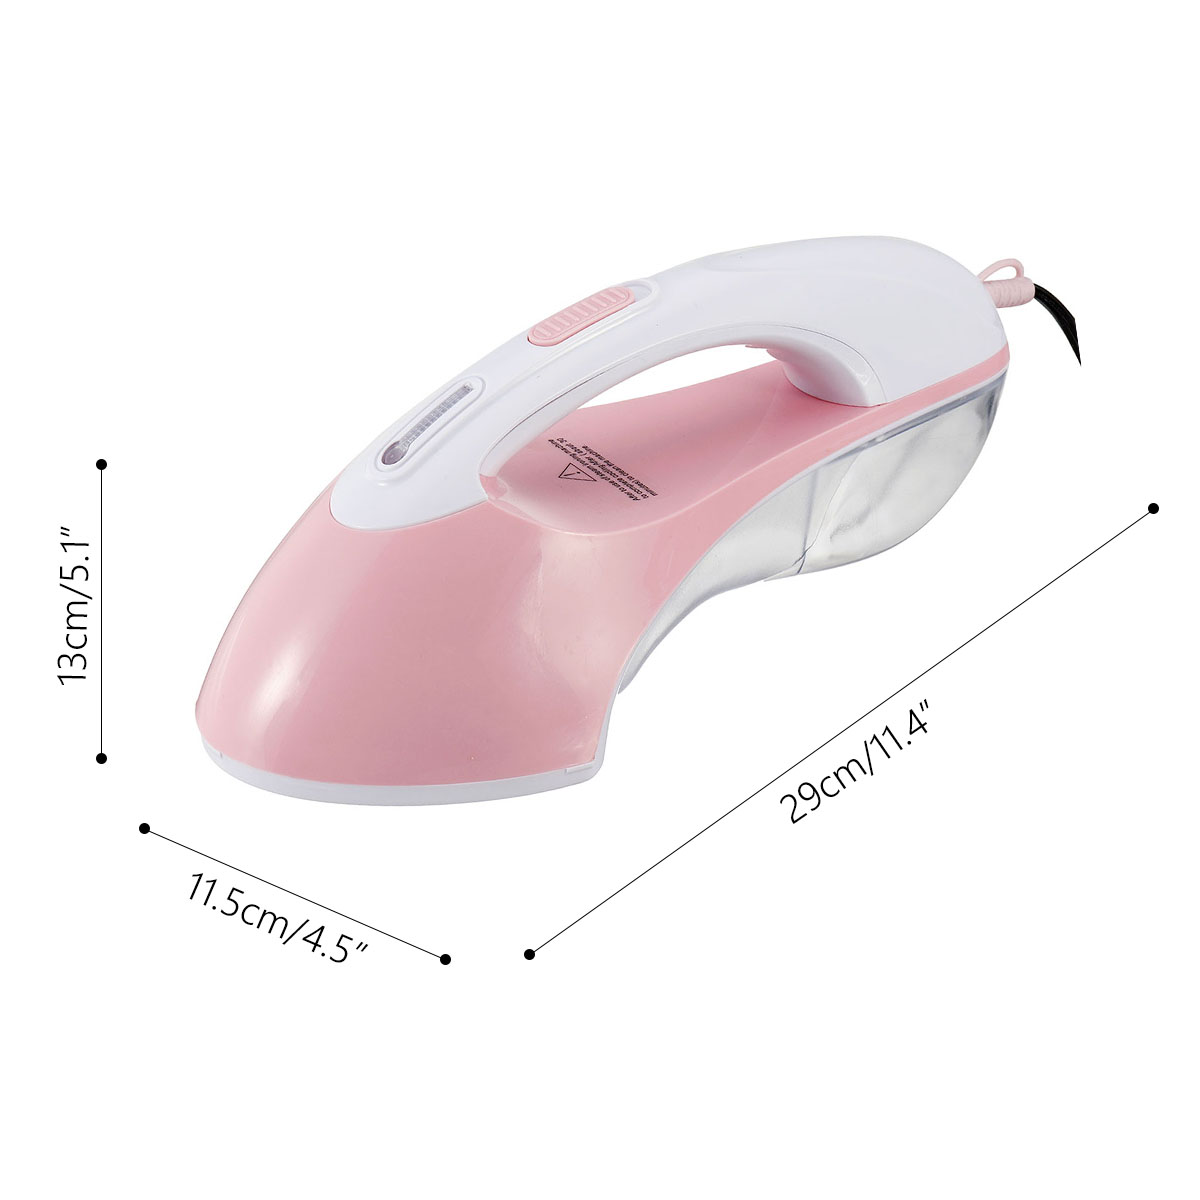 110V-1000W-Handheld-Electric-Steam-Iron-Fabric-Clothes-Garment-Steamer-Dry-Flat-1500430-10